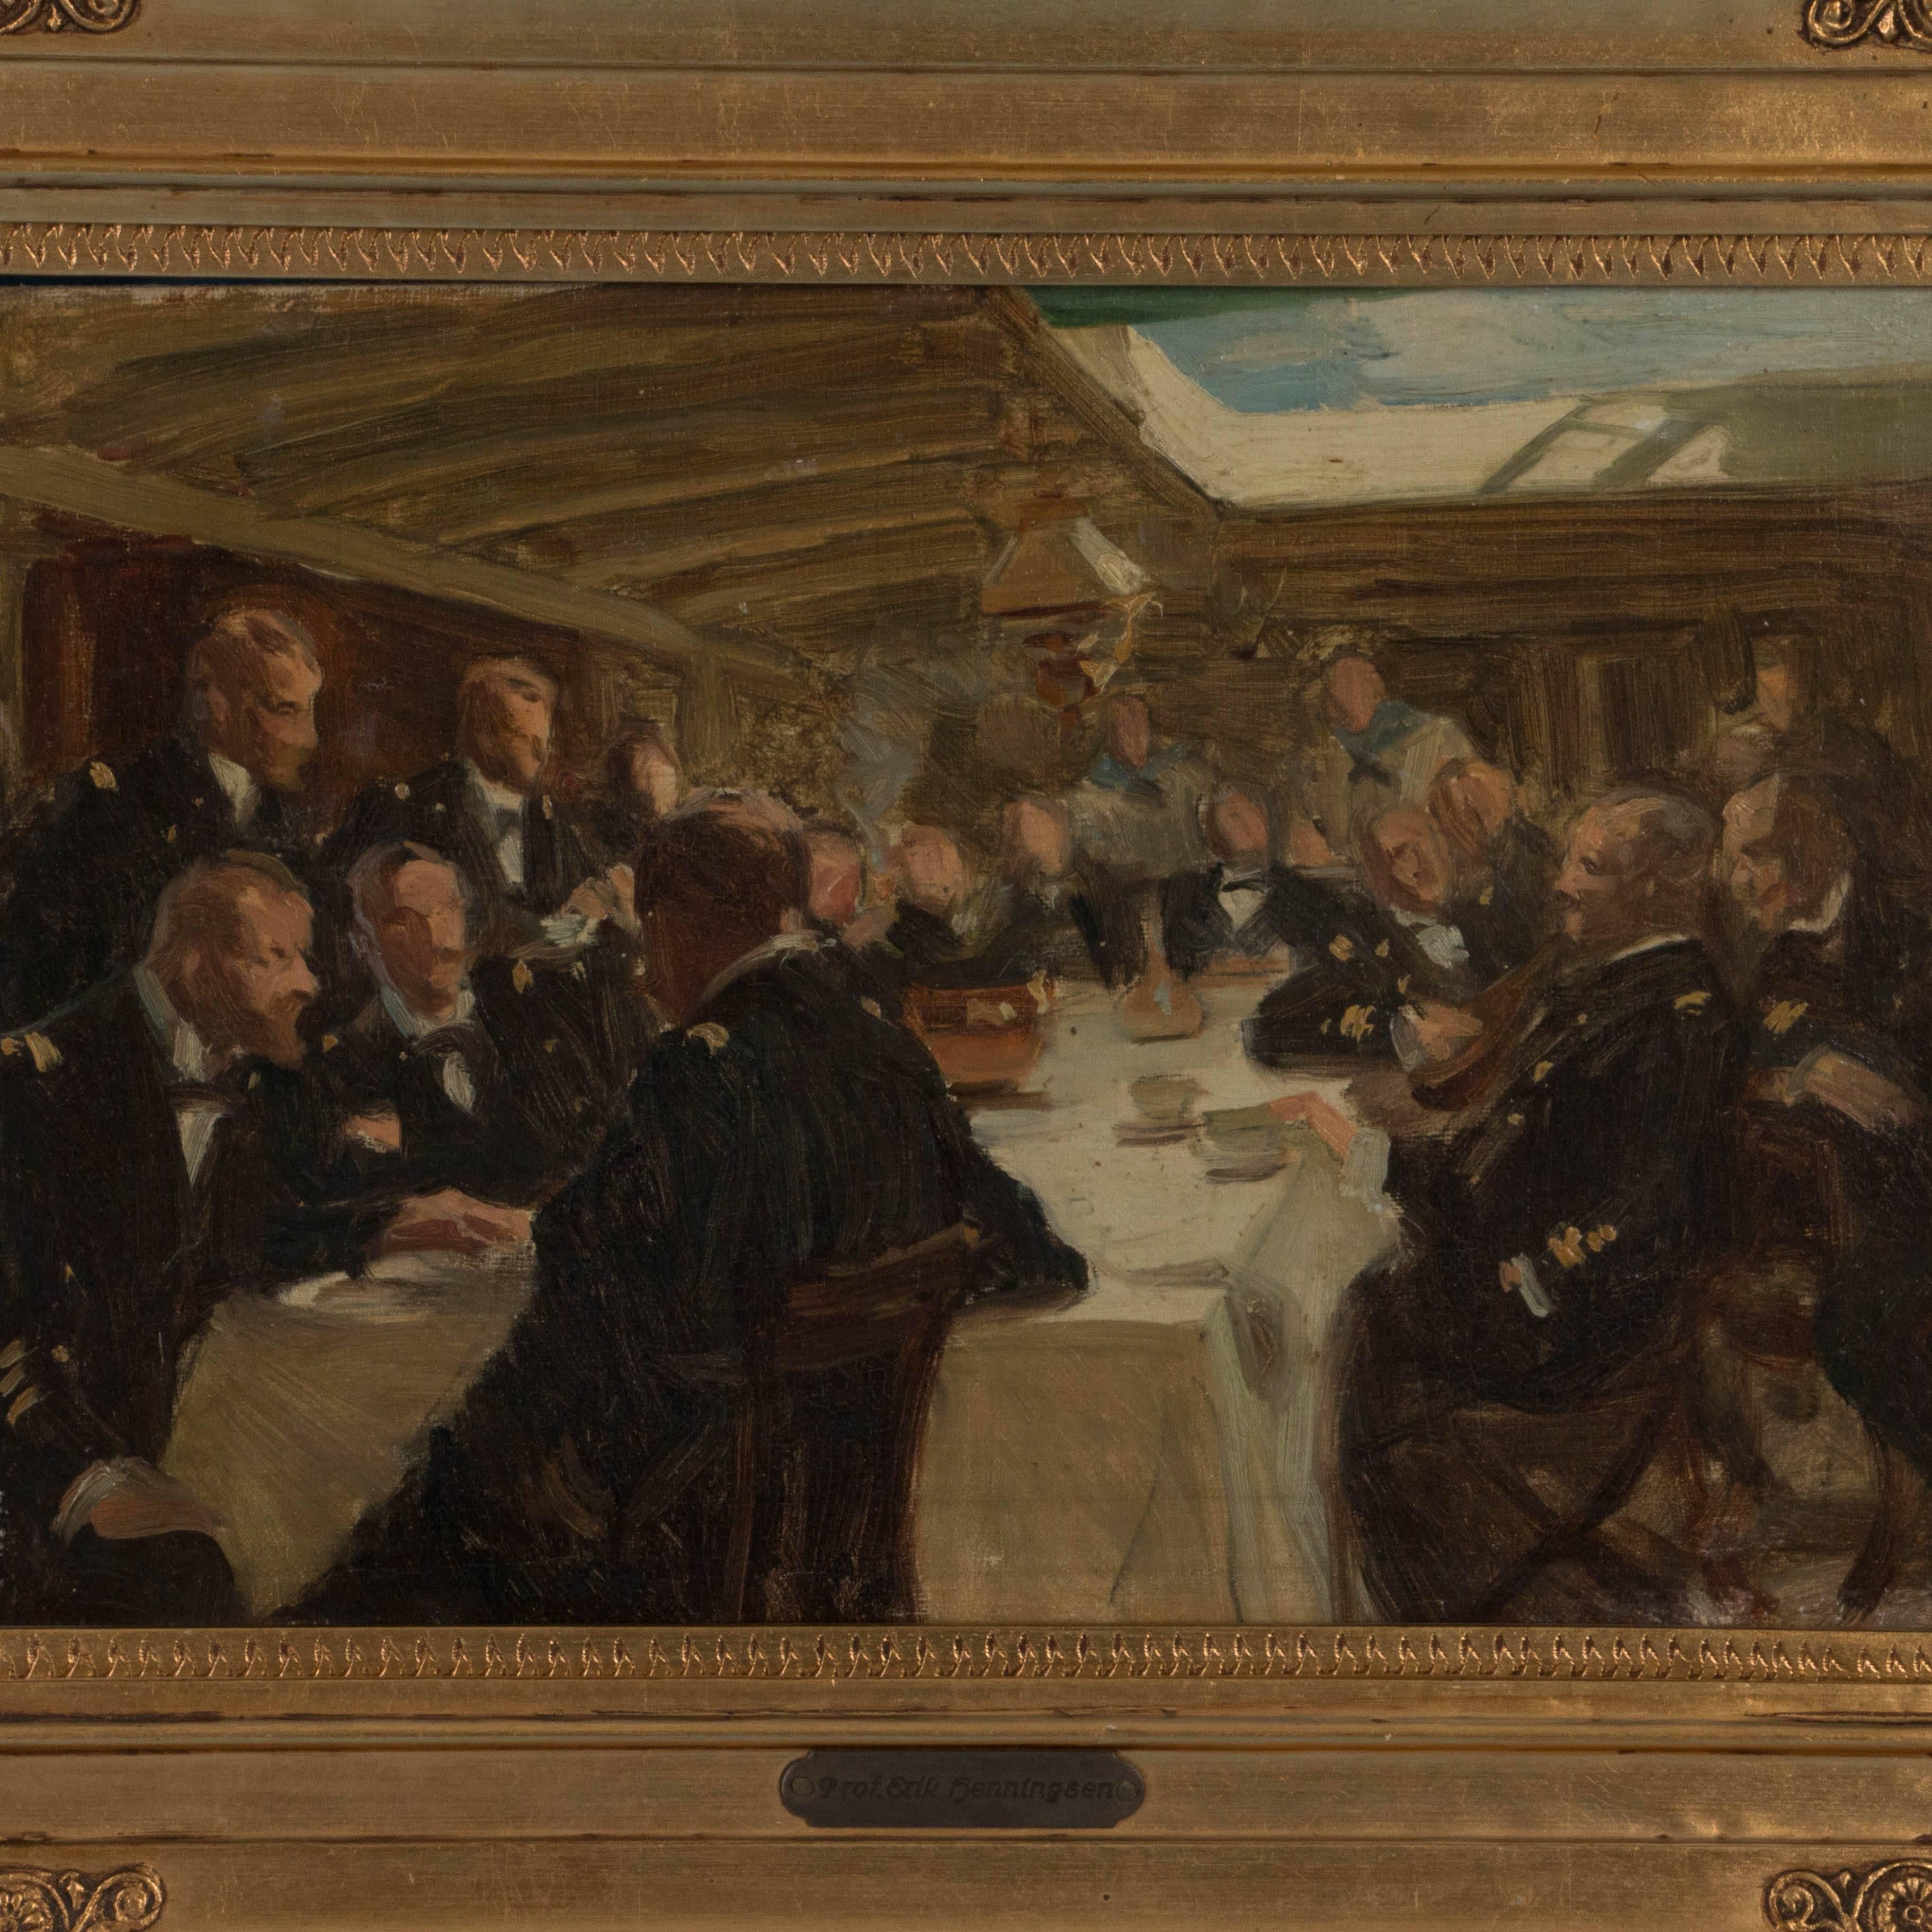 This engaging original oil painting, a meeting of naval officers aboard the Danish steam frigate Jylland, is by Eric Henningsen (1855-1930). Most notable is how the painting draws you into the room to become part of the discussion. The painting